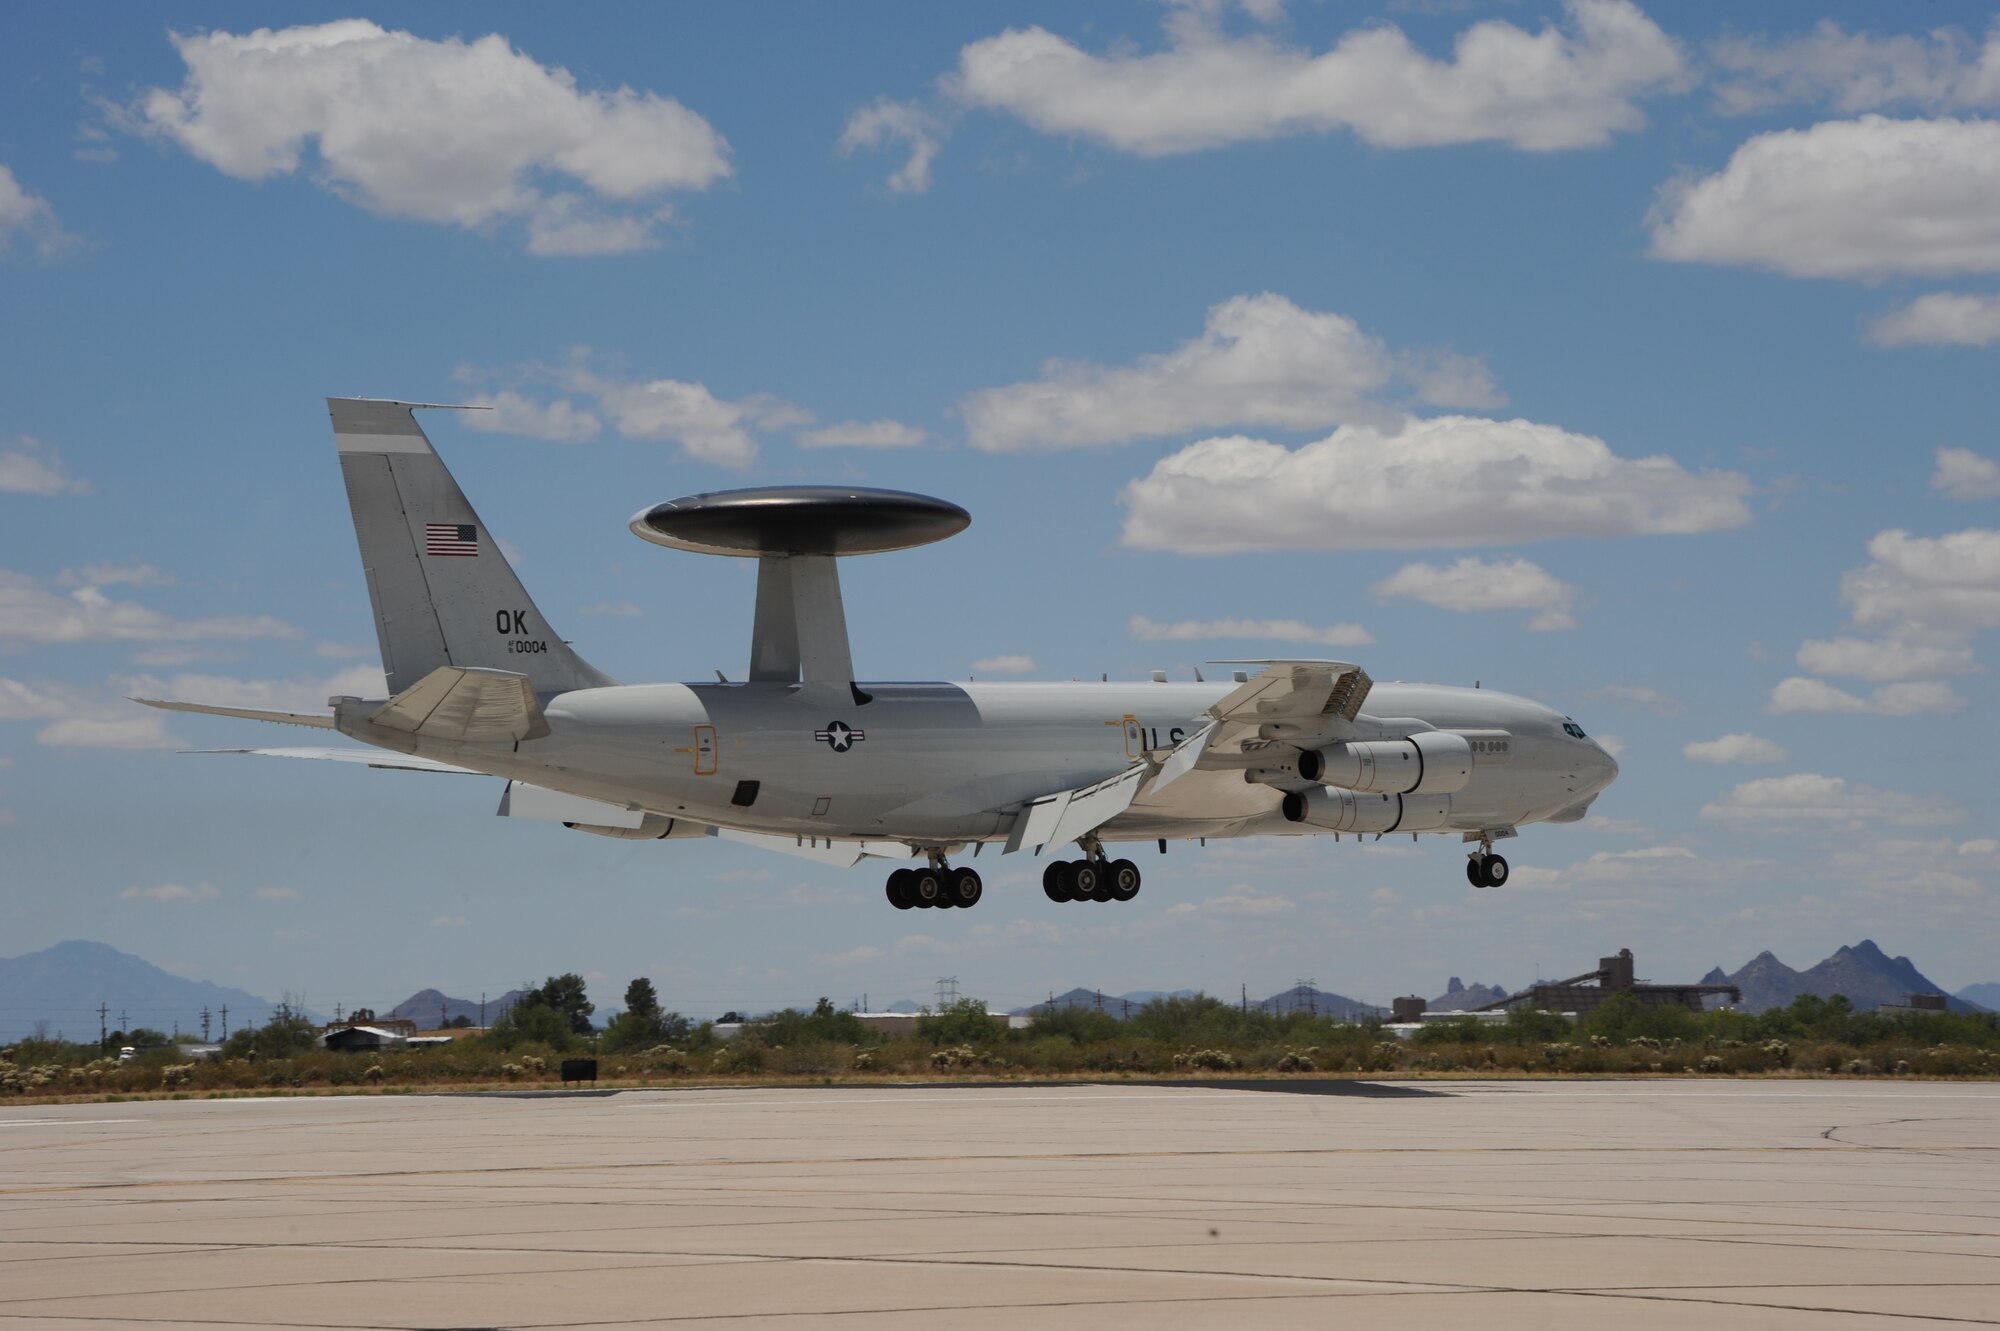 An E-3 Sentry AWACS from Tinker Air Force Base, Okla., prepares to land May 16, 2015. AWACS have the capability to detect enemy as well as friendly aircraft at great distances using an interrogation system. A program office from Hanscom AFB, Mass., is modernizing the aircraft by updating the current interrogation system. The first installation was completed in April. (U.S. Air Force photo/Senior Airman Betty R. Chevalier)  